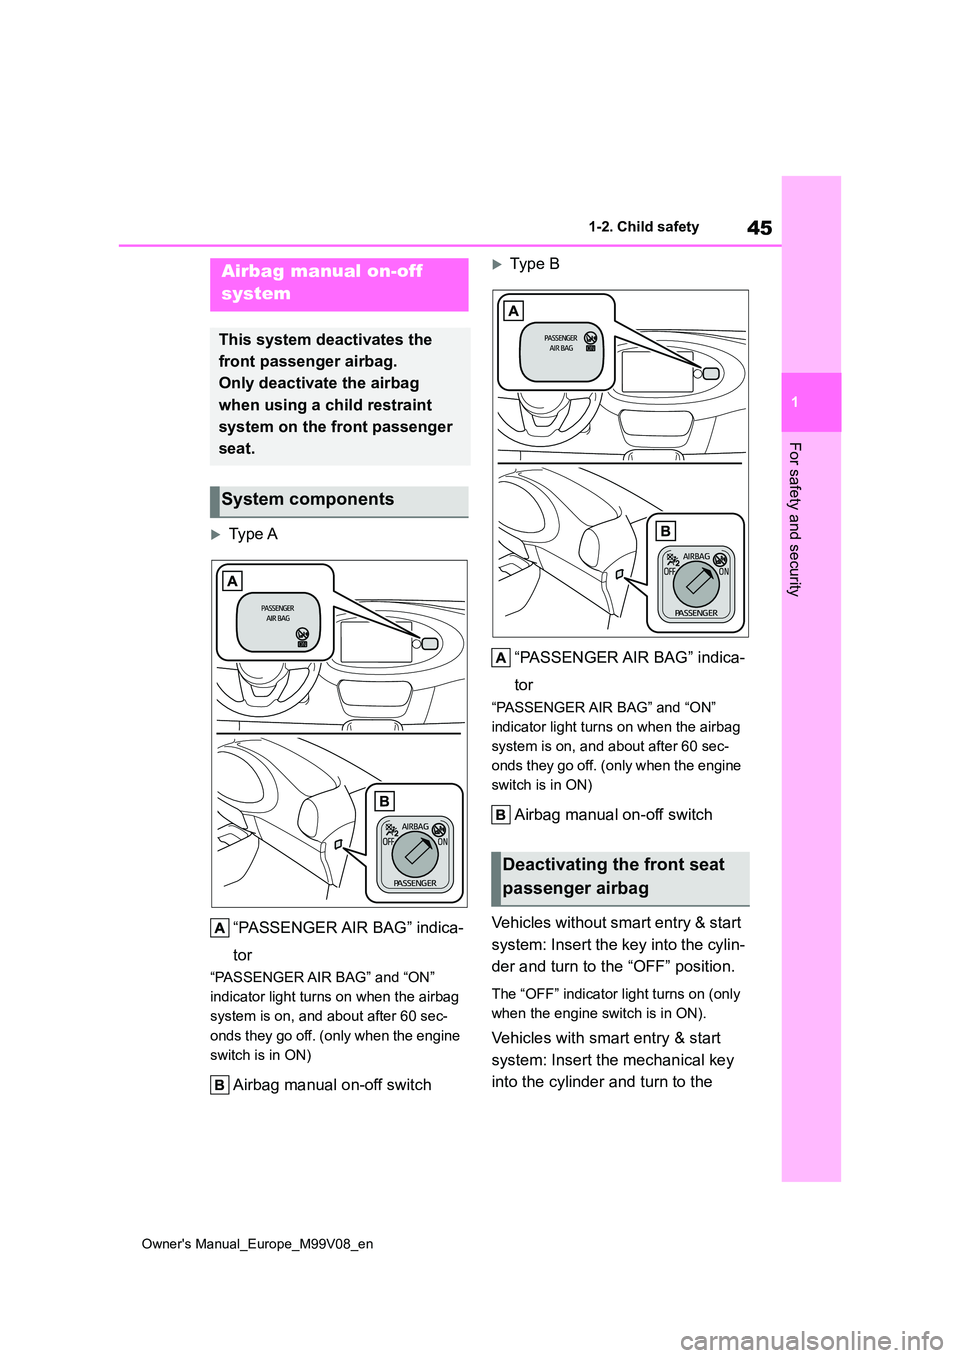 TOYOTA AYGO X 2022  Owners Manual (in English) 45
1
Owner's Manual_Europe_M99V08_en
1-2. Child safety
For safety and security
1-2.Child sa fety
Type A 
“PASSENGER AIR BAG” indica- 
tor
“PASSENGER AIR BAG” and “ON”  
indicator li